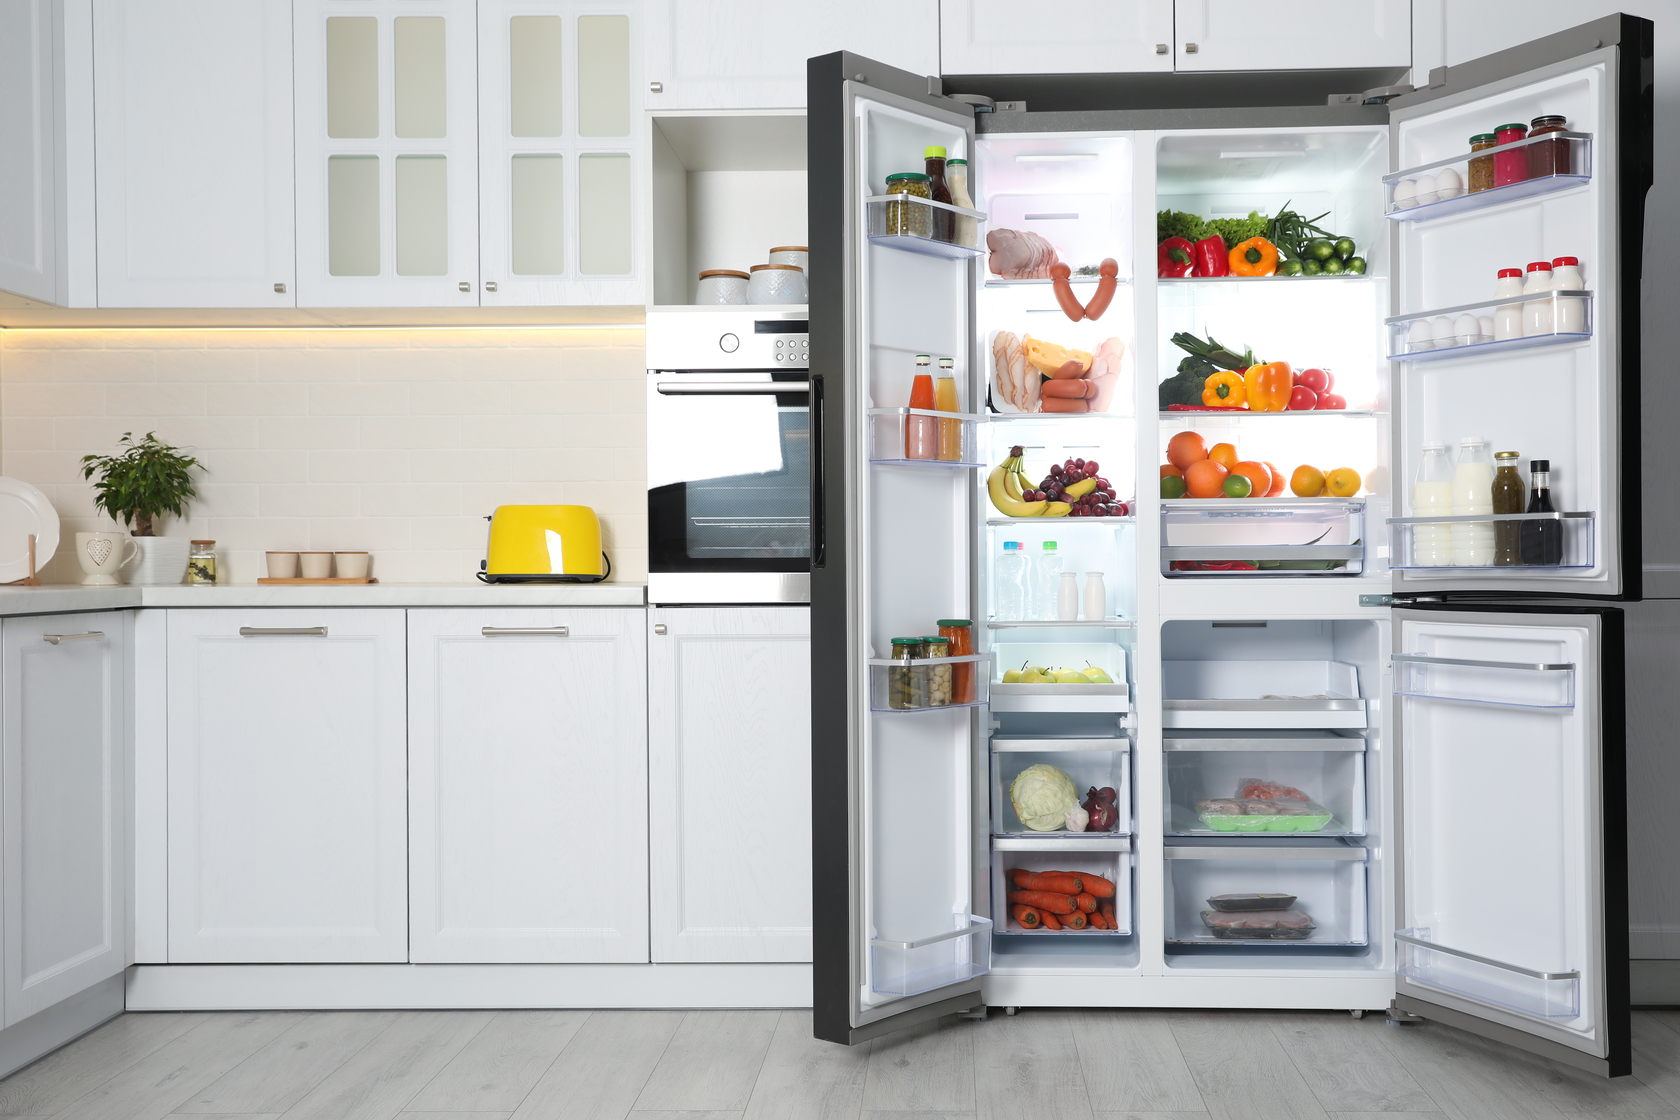 Two-door refrigerator open and filled with food